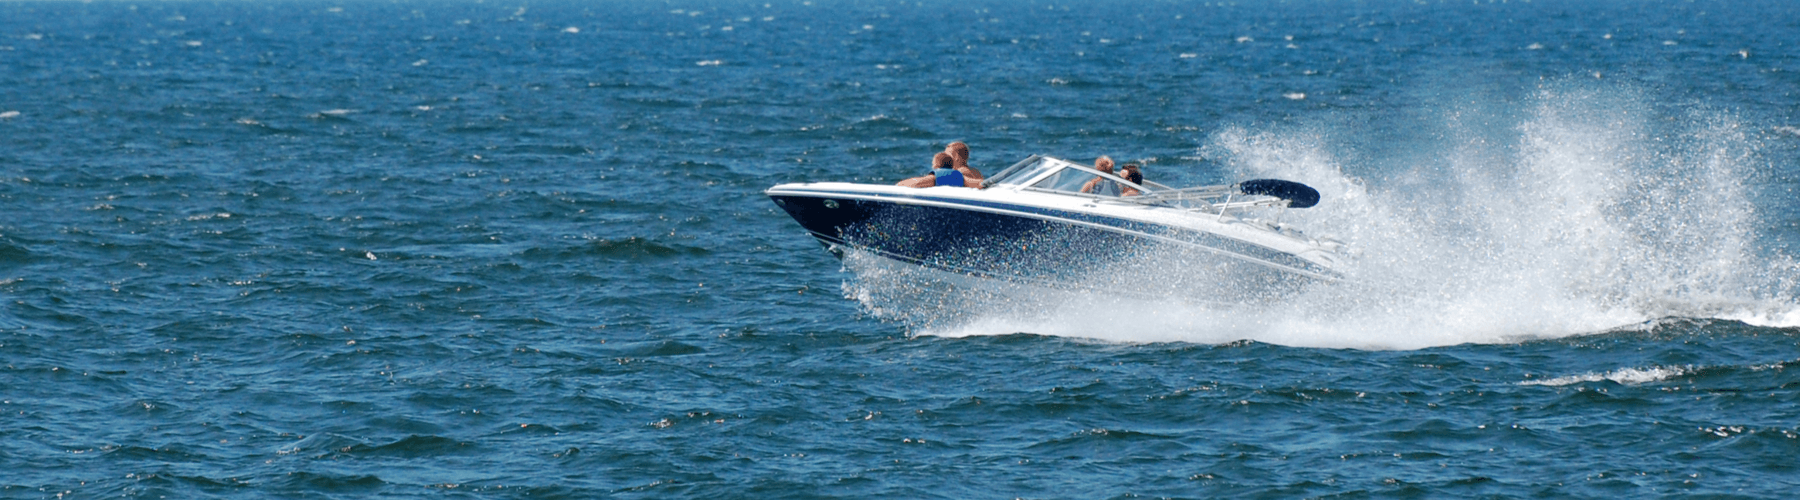 Speedboat on Lake Michigan, just outside of Chicago, Illinois 